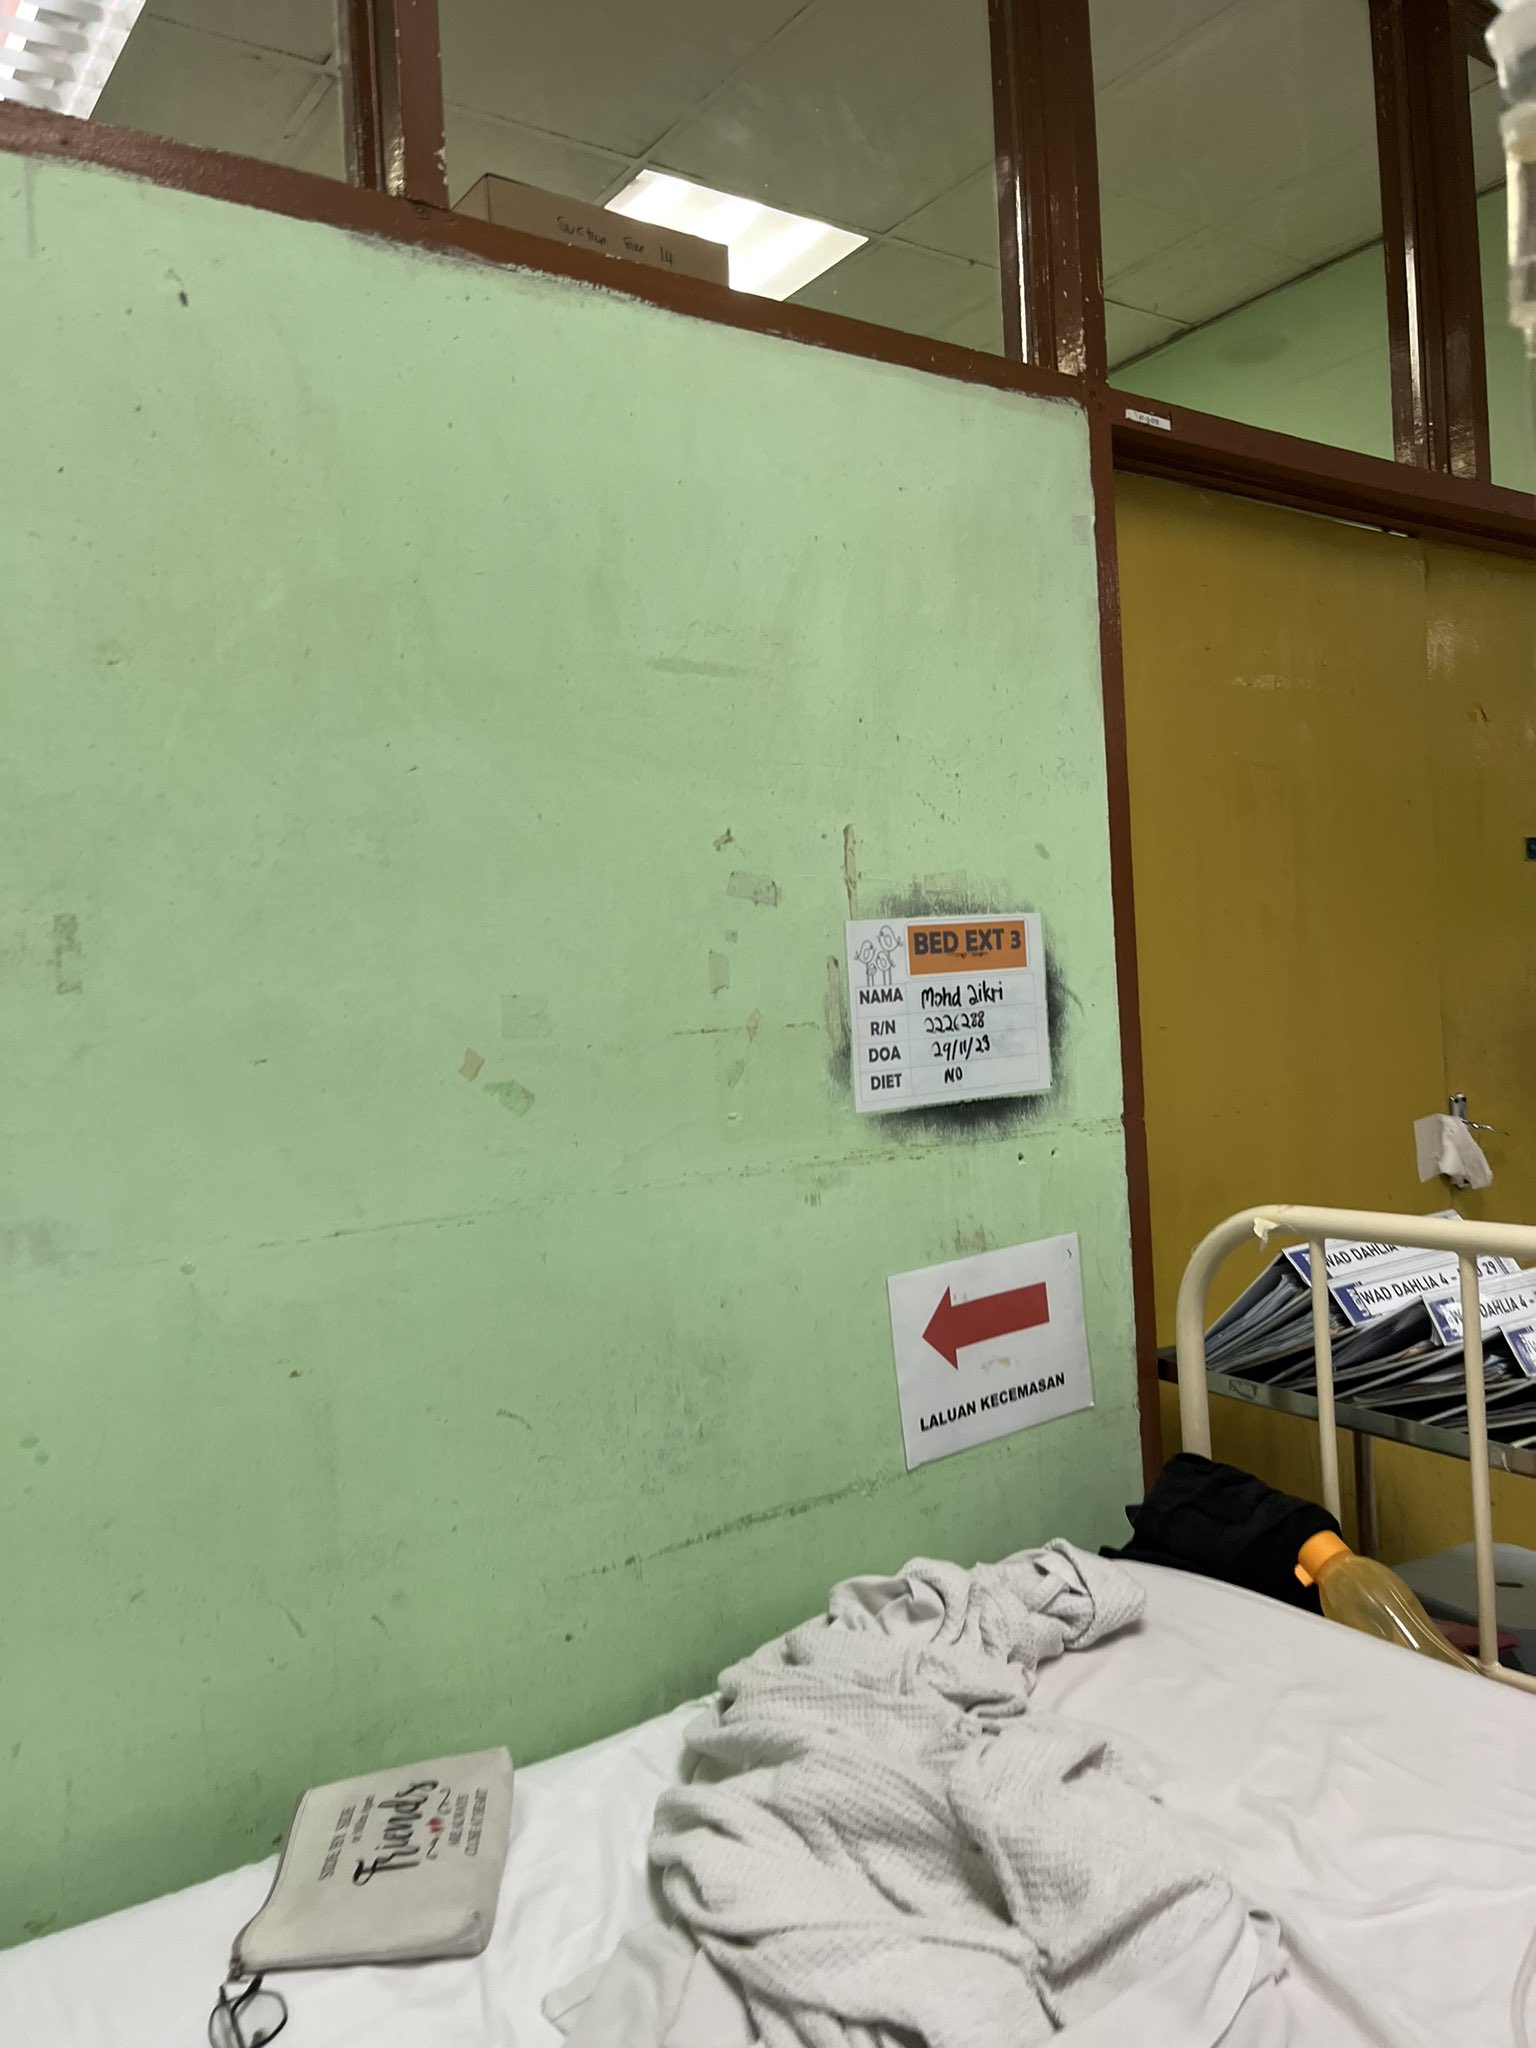 The subpar condition at a government hospital at johor.